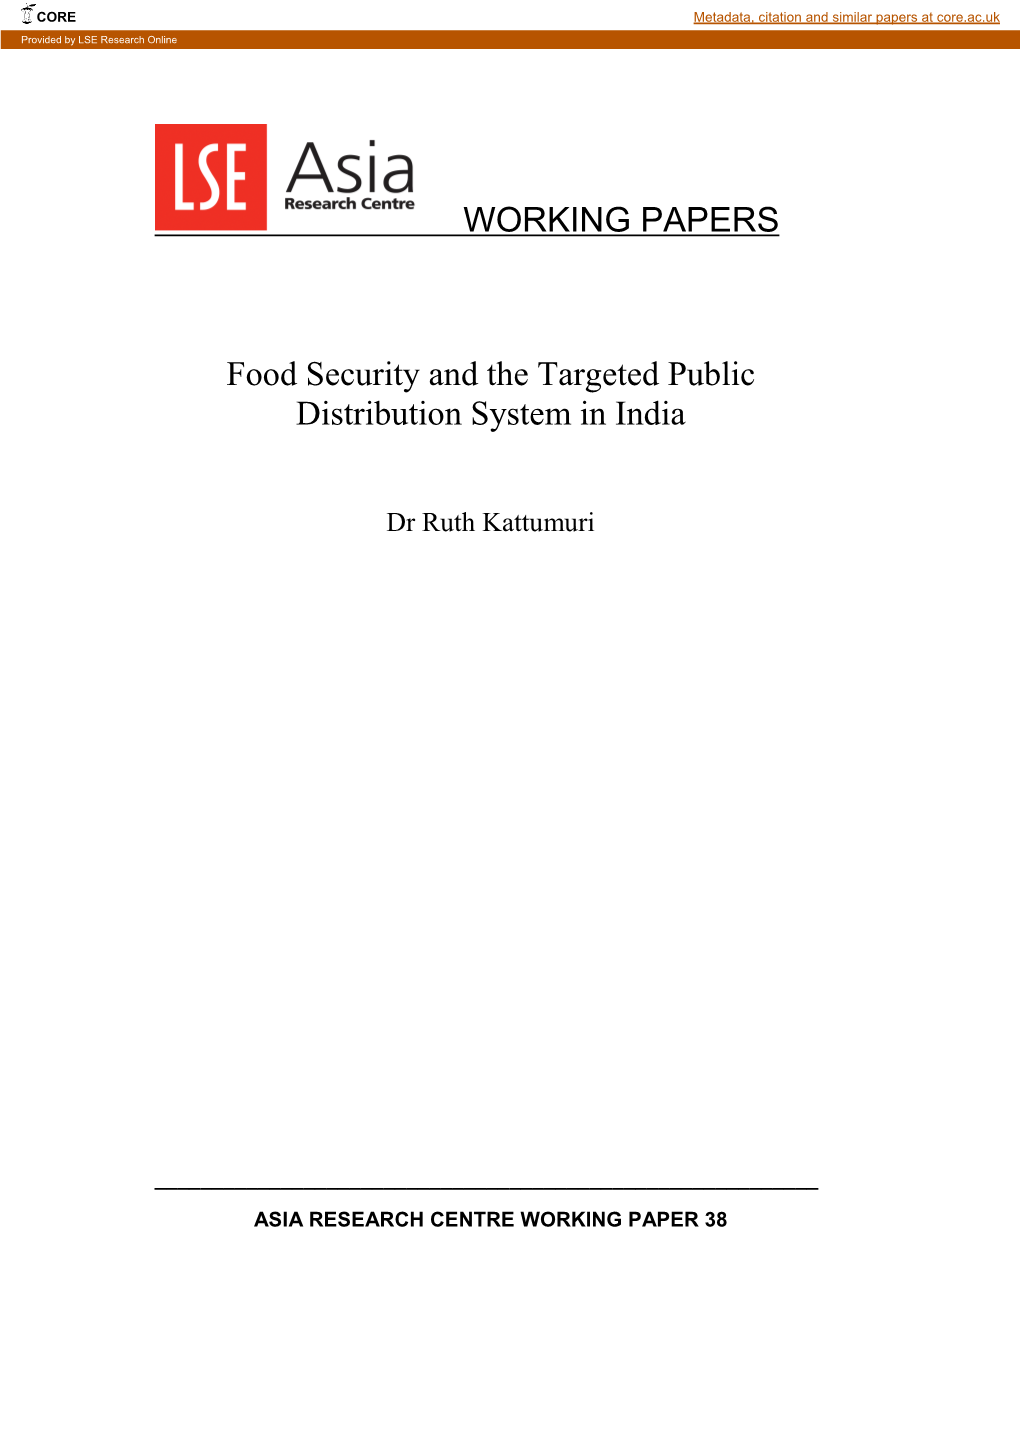 WORKING PAPERS Food Security and the Targeted Public Distribution